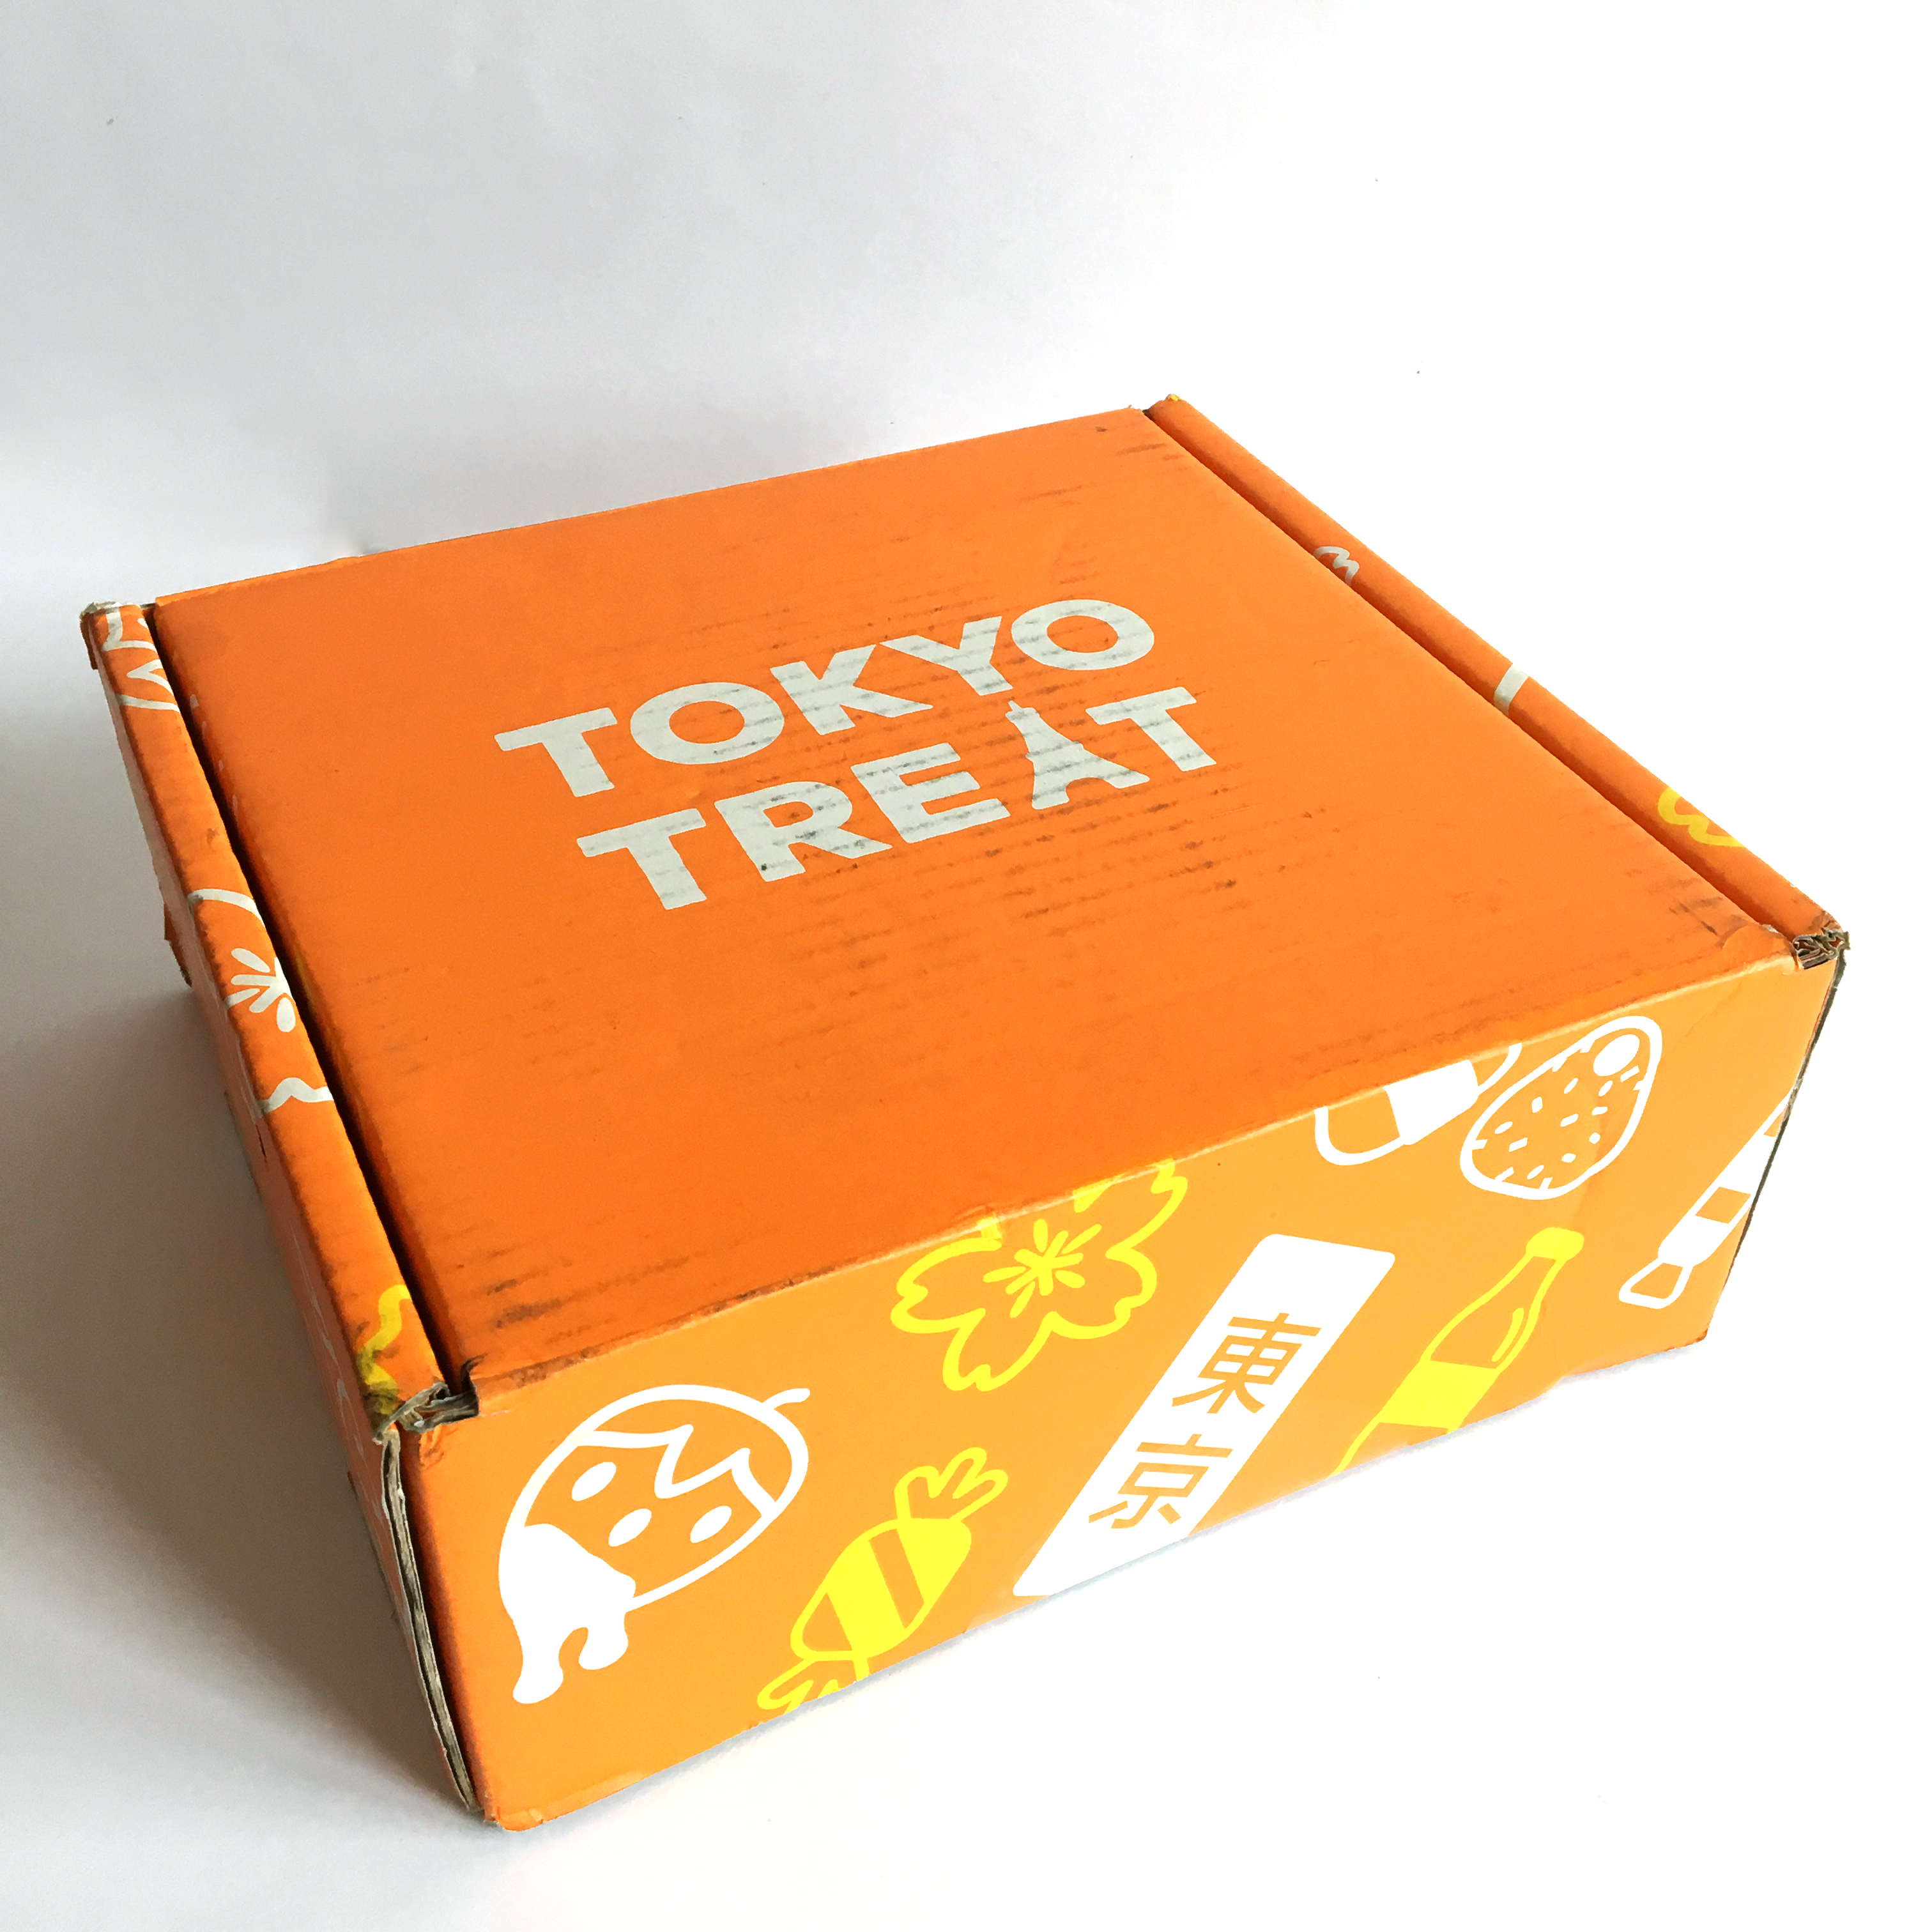 TokyoTreat Subscription Box Review + Coupon – February 2018